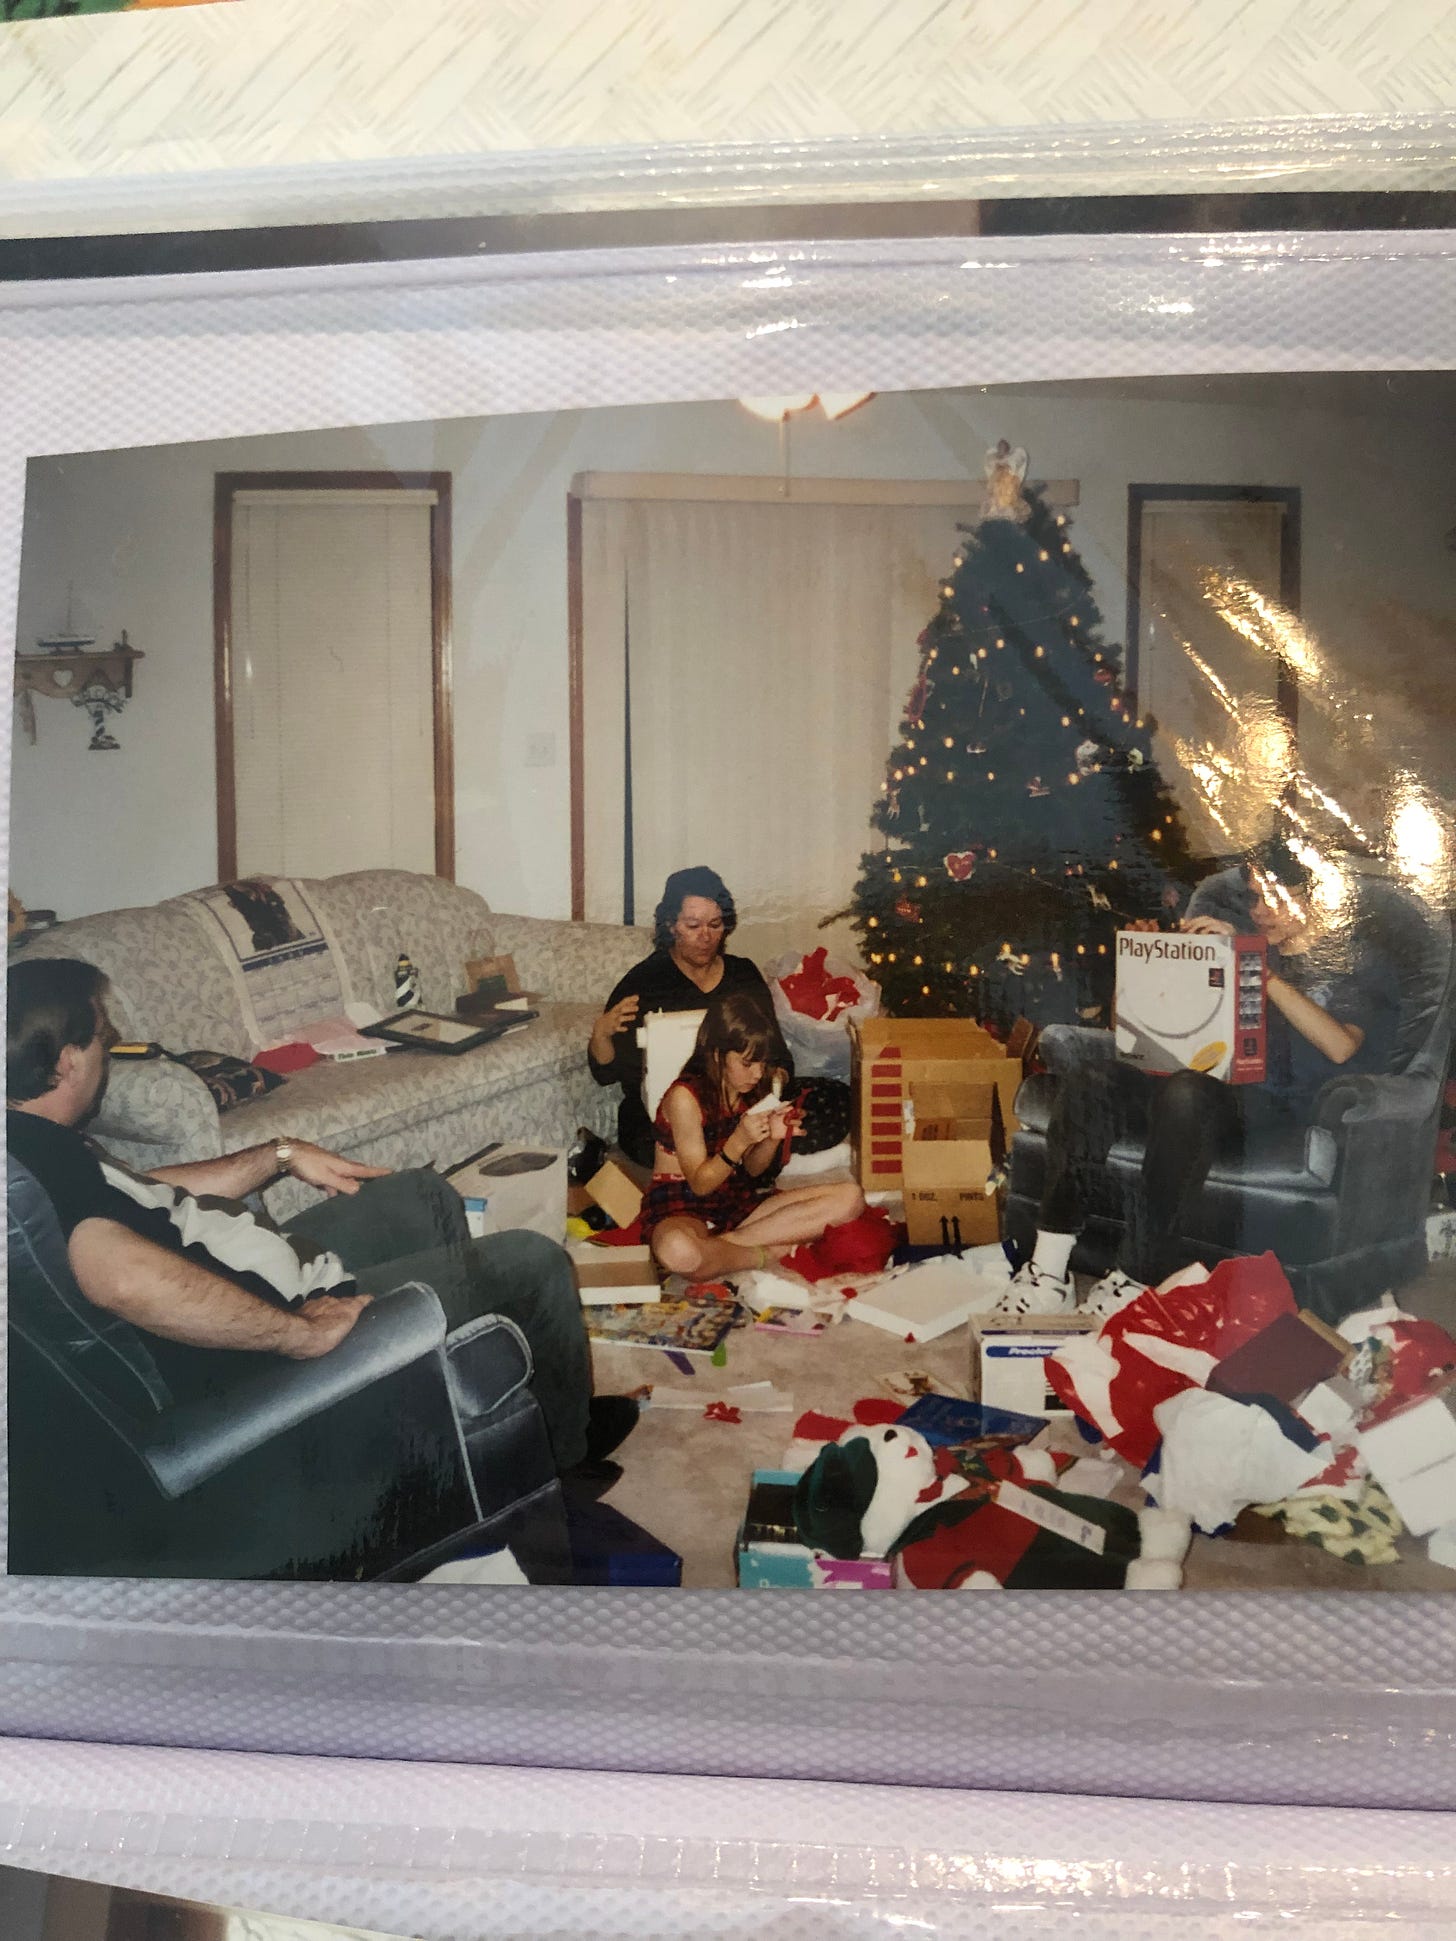 my family sitting with messes of presents around a Christmas tree. My mom is beside me, my dad is in a chair, and my brother sits in another chair. I'm looking intently at a present. 